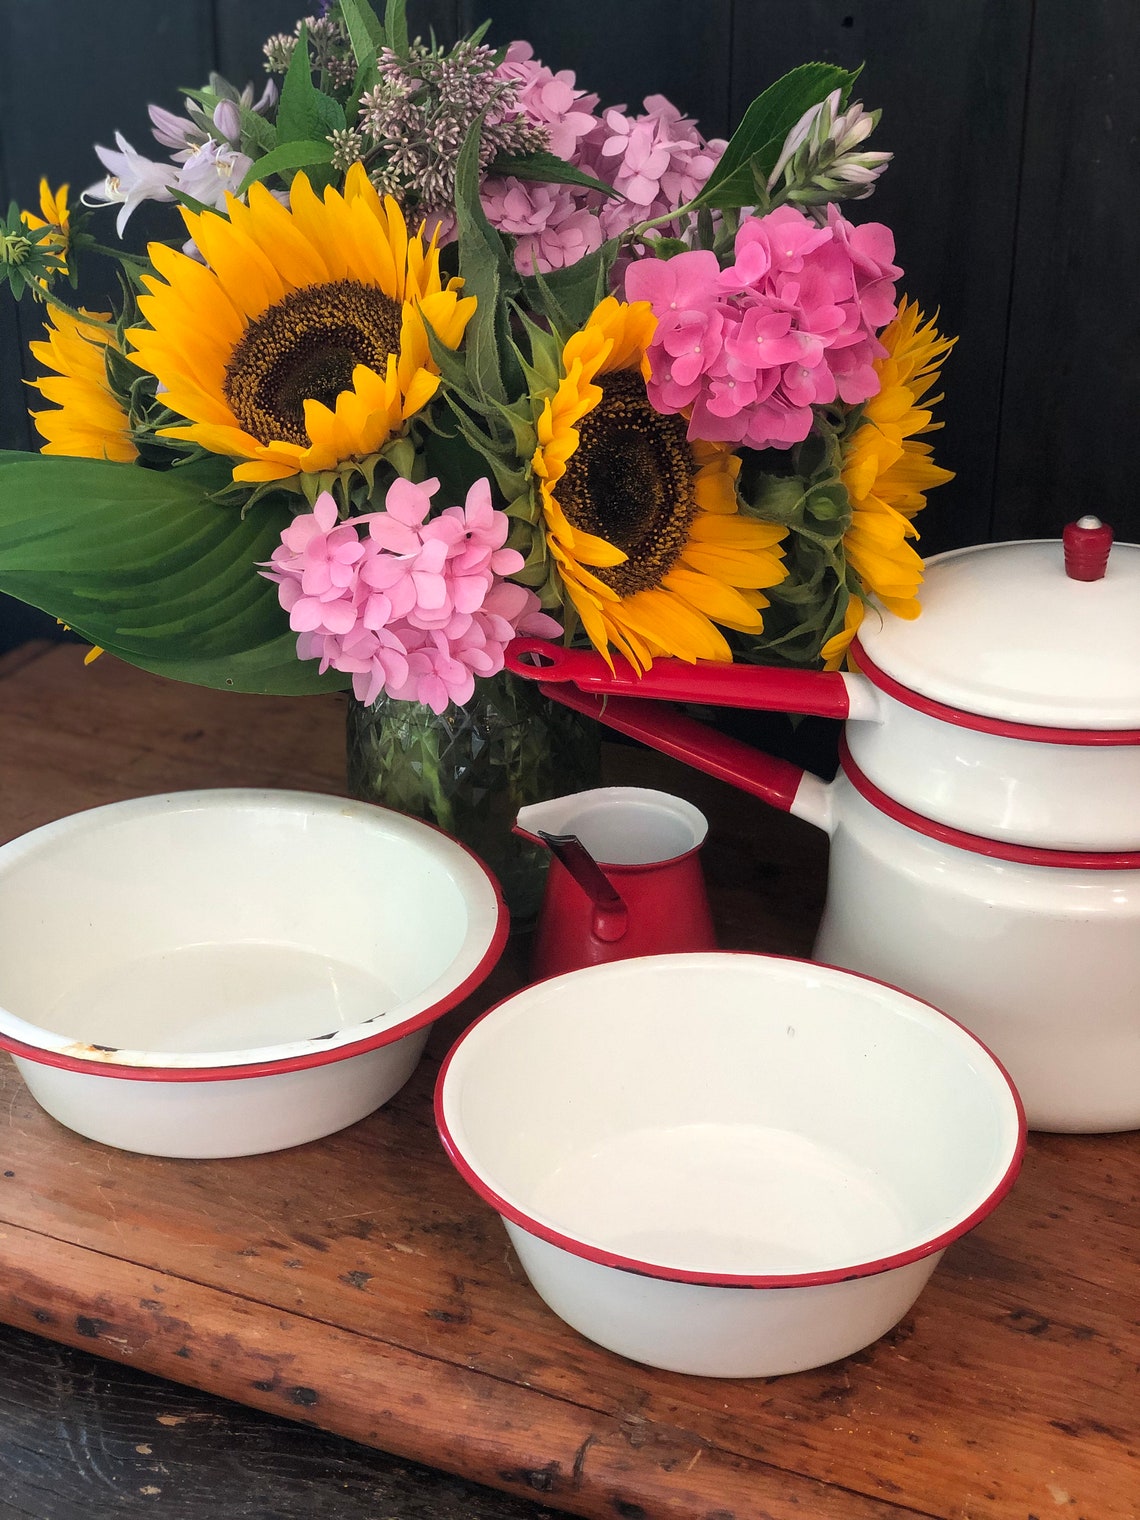 Vintage Red and White Enamelware Set 6 Pieces Largest Bowl | Etsy